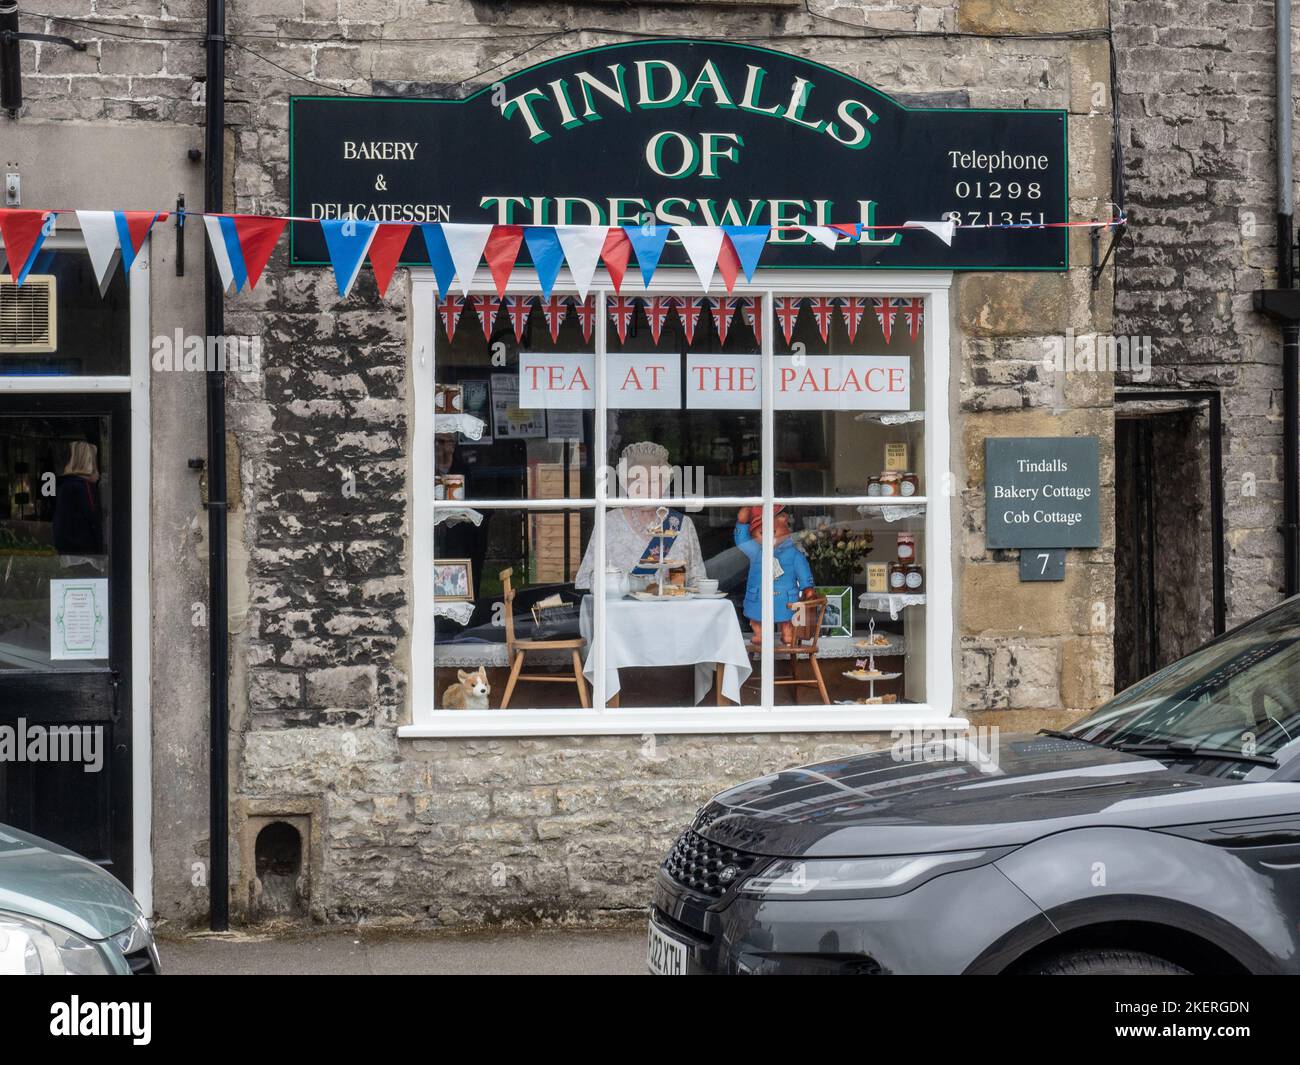 Tindalls of Tideswell, a bakery, food shop and cafe, in the Peak District village of Tidewell, Derbyshire UK; decorated for the Queen's Jubilee Stock Photo